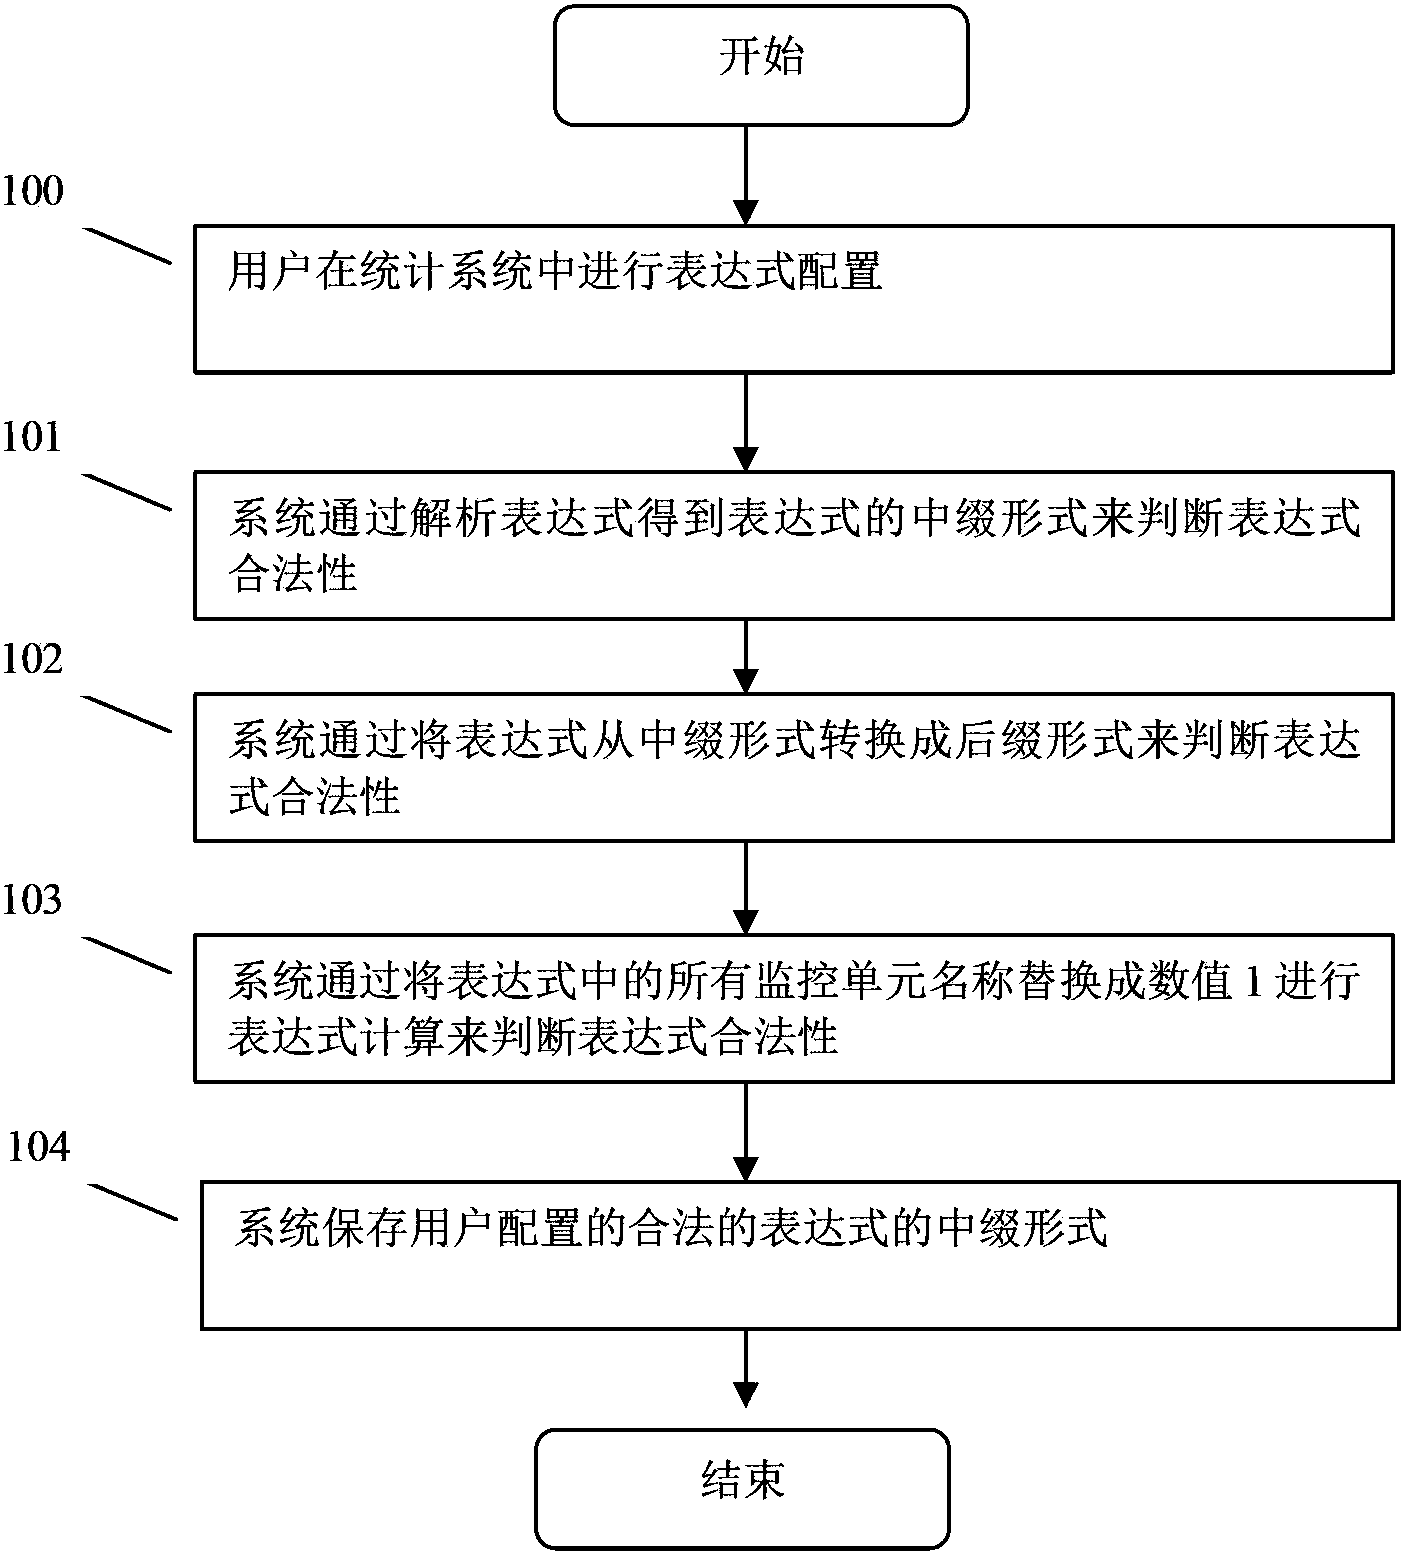 Method for monitoring and managing industrial on-site bottom layer device through expression analysis